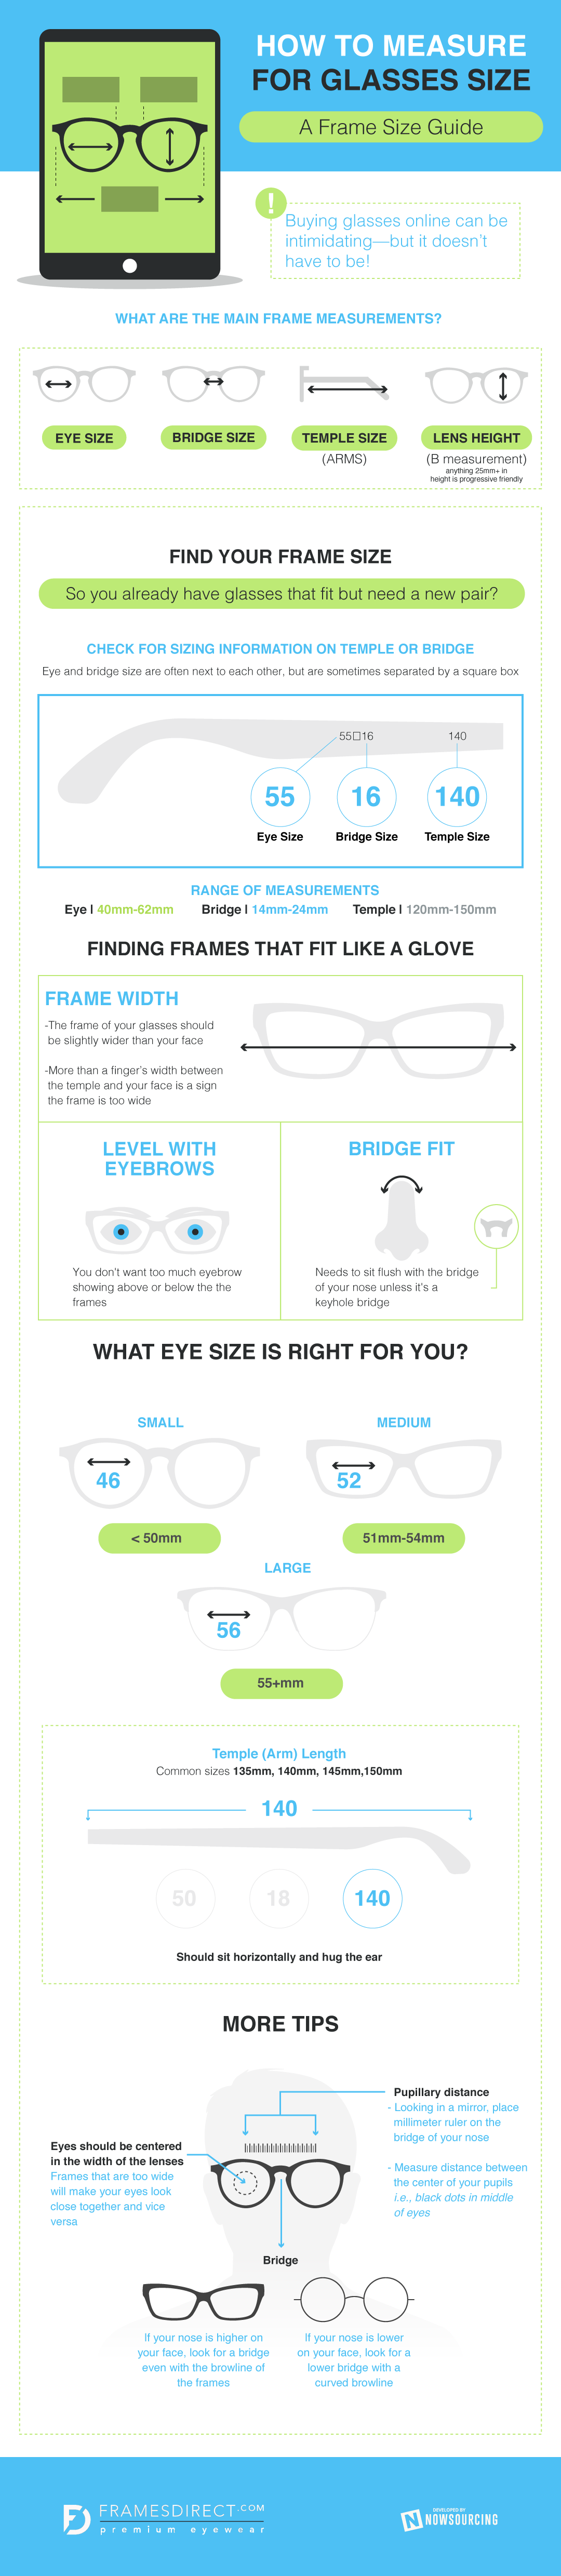 Measuring Glasses Made Simple